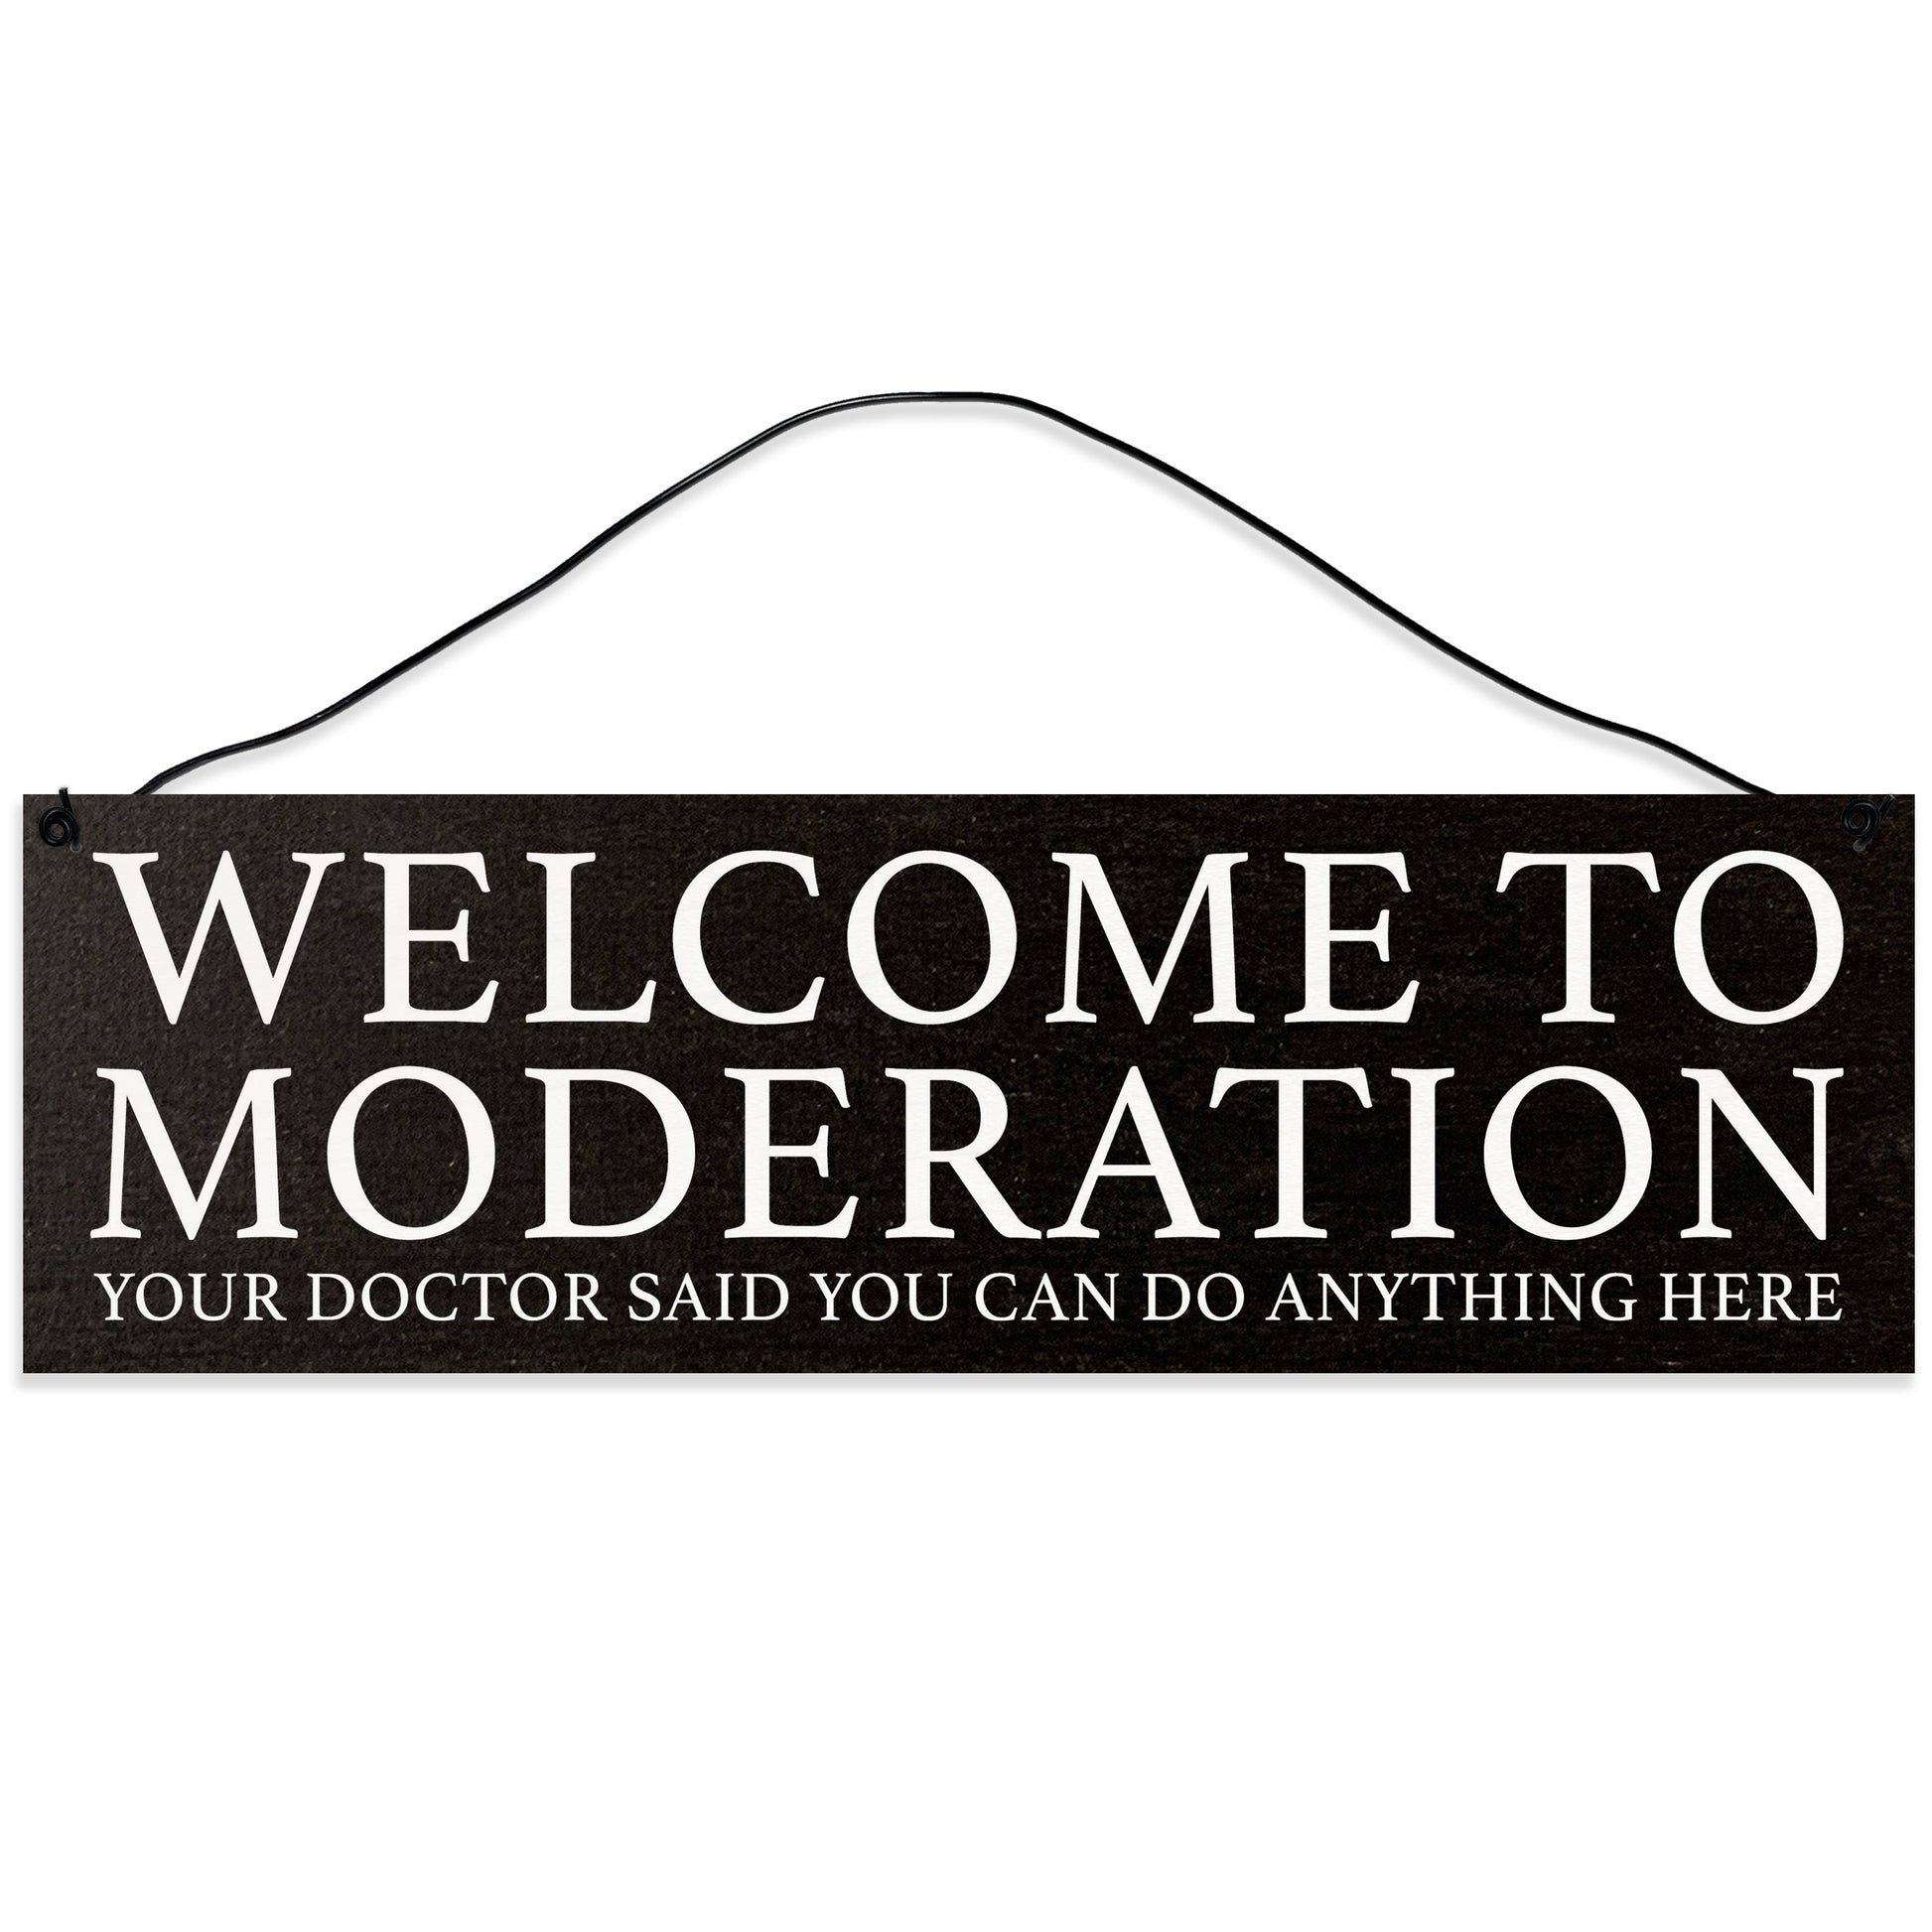 Sawyer's Mill - Welcome to Moderation. Your Doctor Said You can do Anything Here. Wood Sign for Home or Office. Measures 3x10 inches.